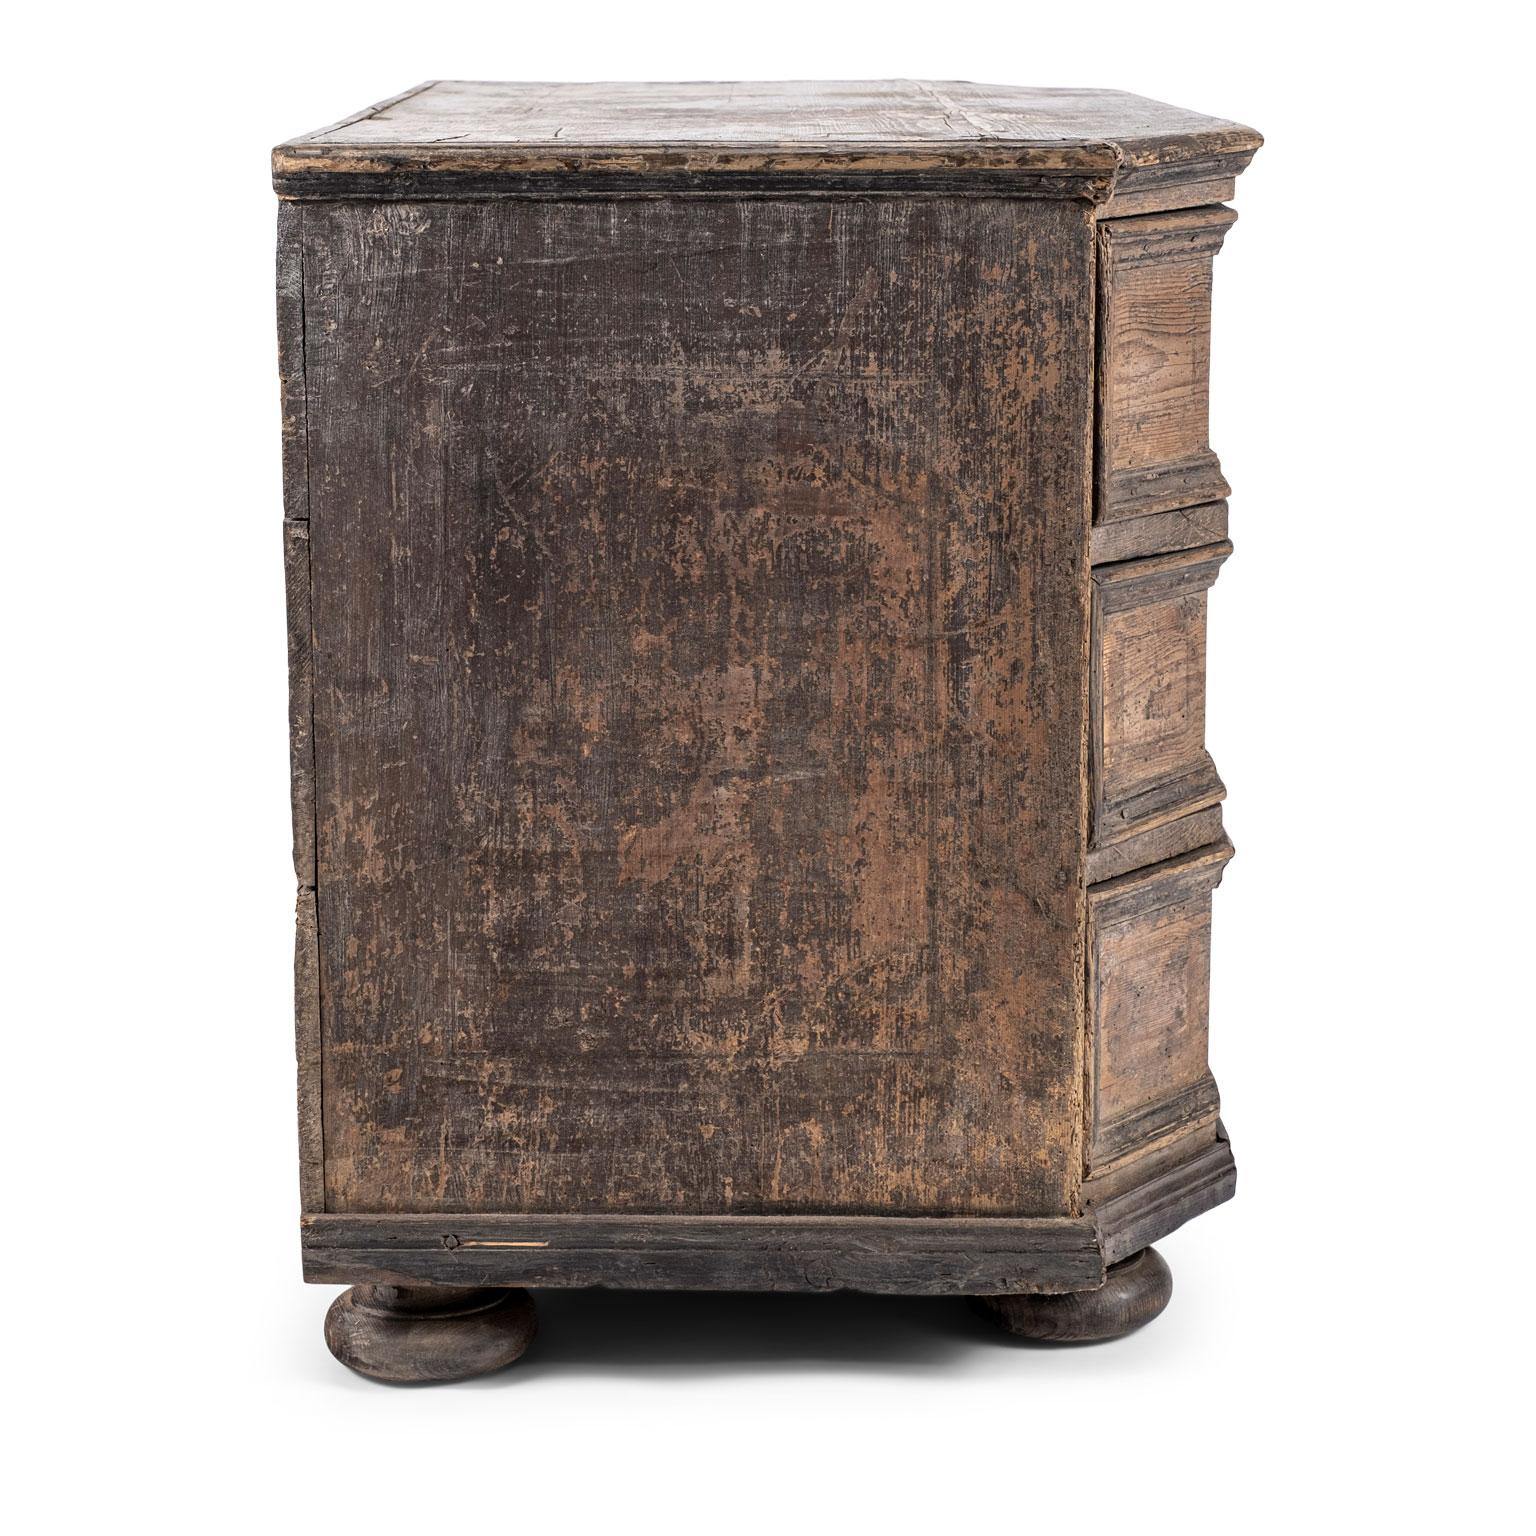 Large-scale Italian painted walnut commode dating to the 18th century. Large scale in mortise and tenon construction, raised upon bun feet. Scraped back to original or early paint. Remnants of early paint naturally worned to reveal beautiful walnut